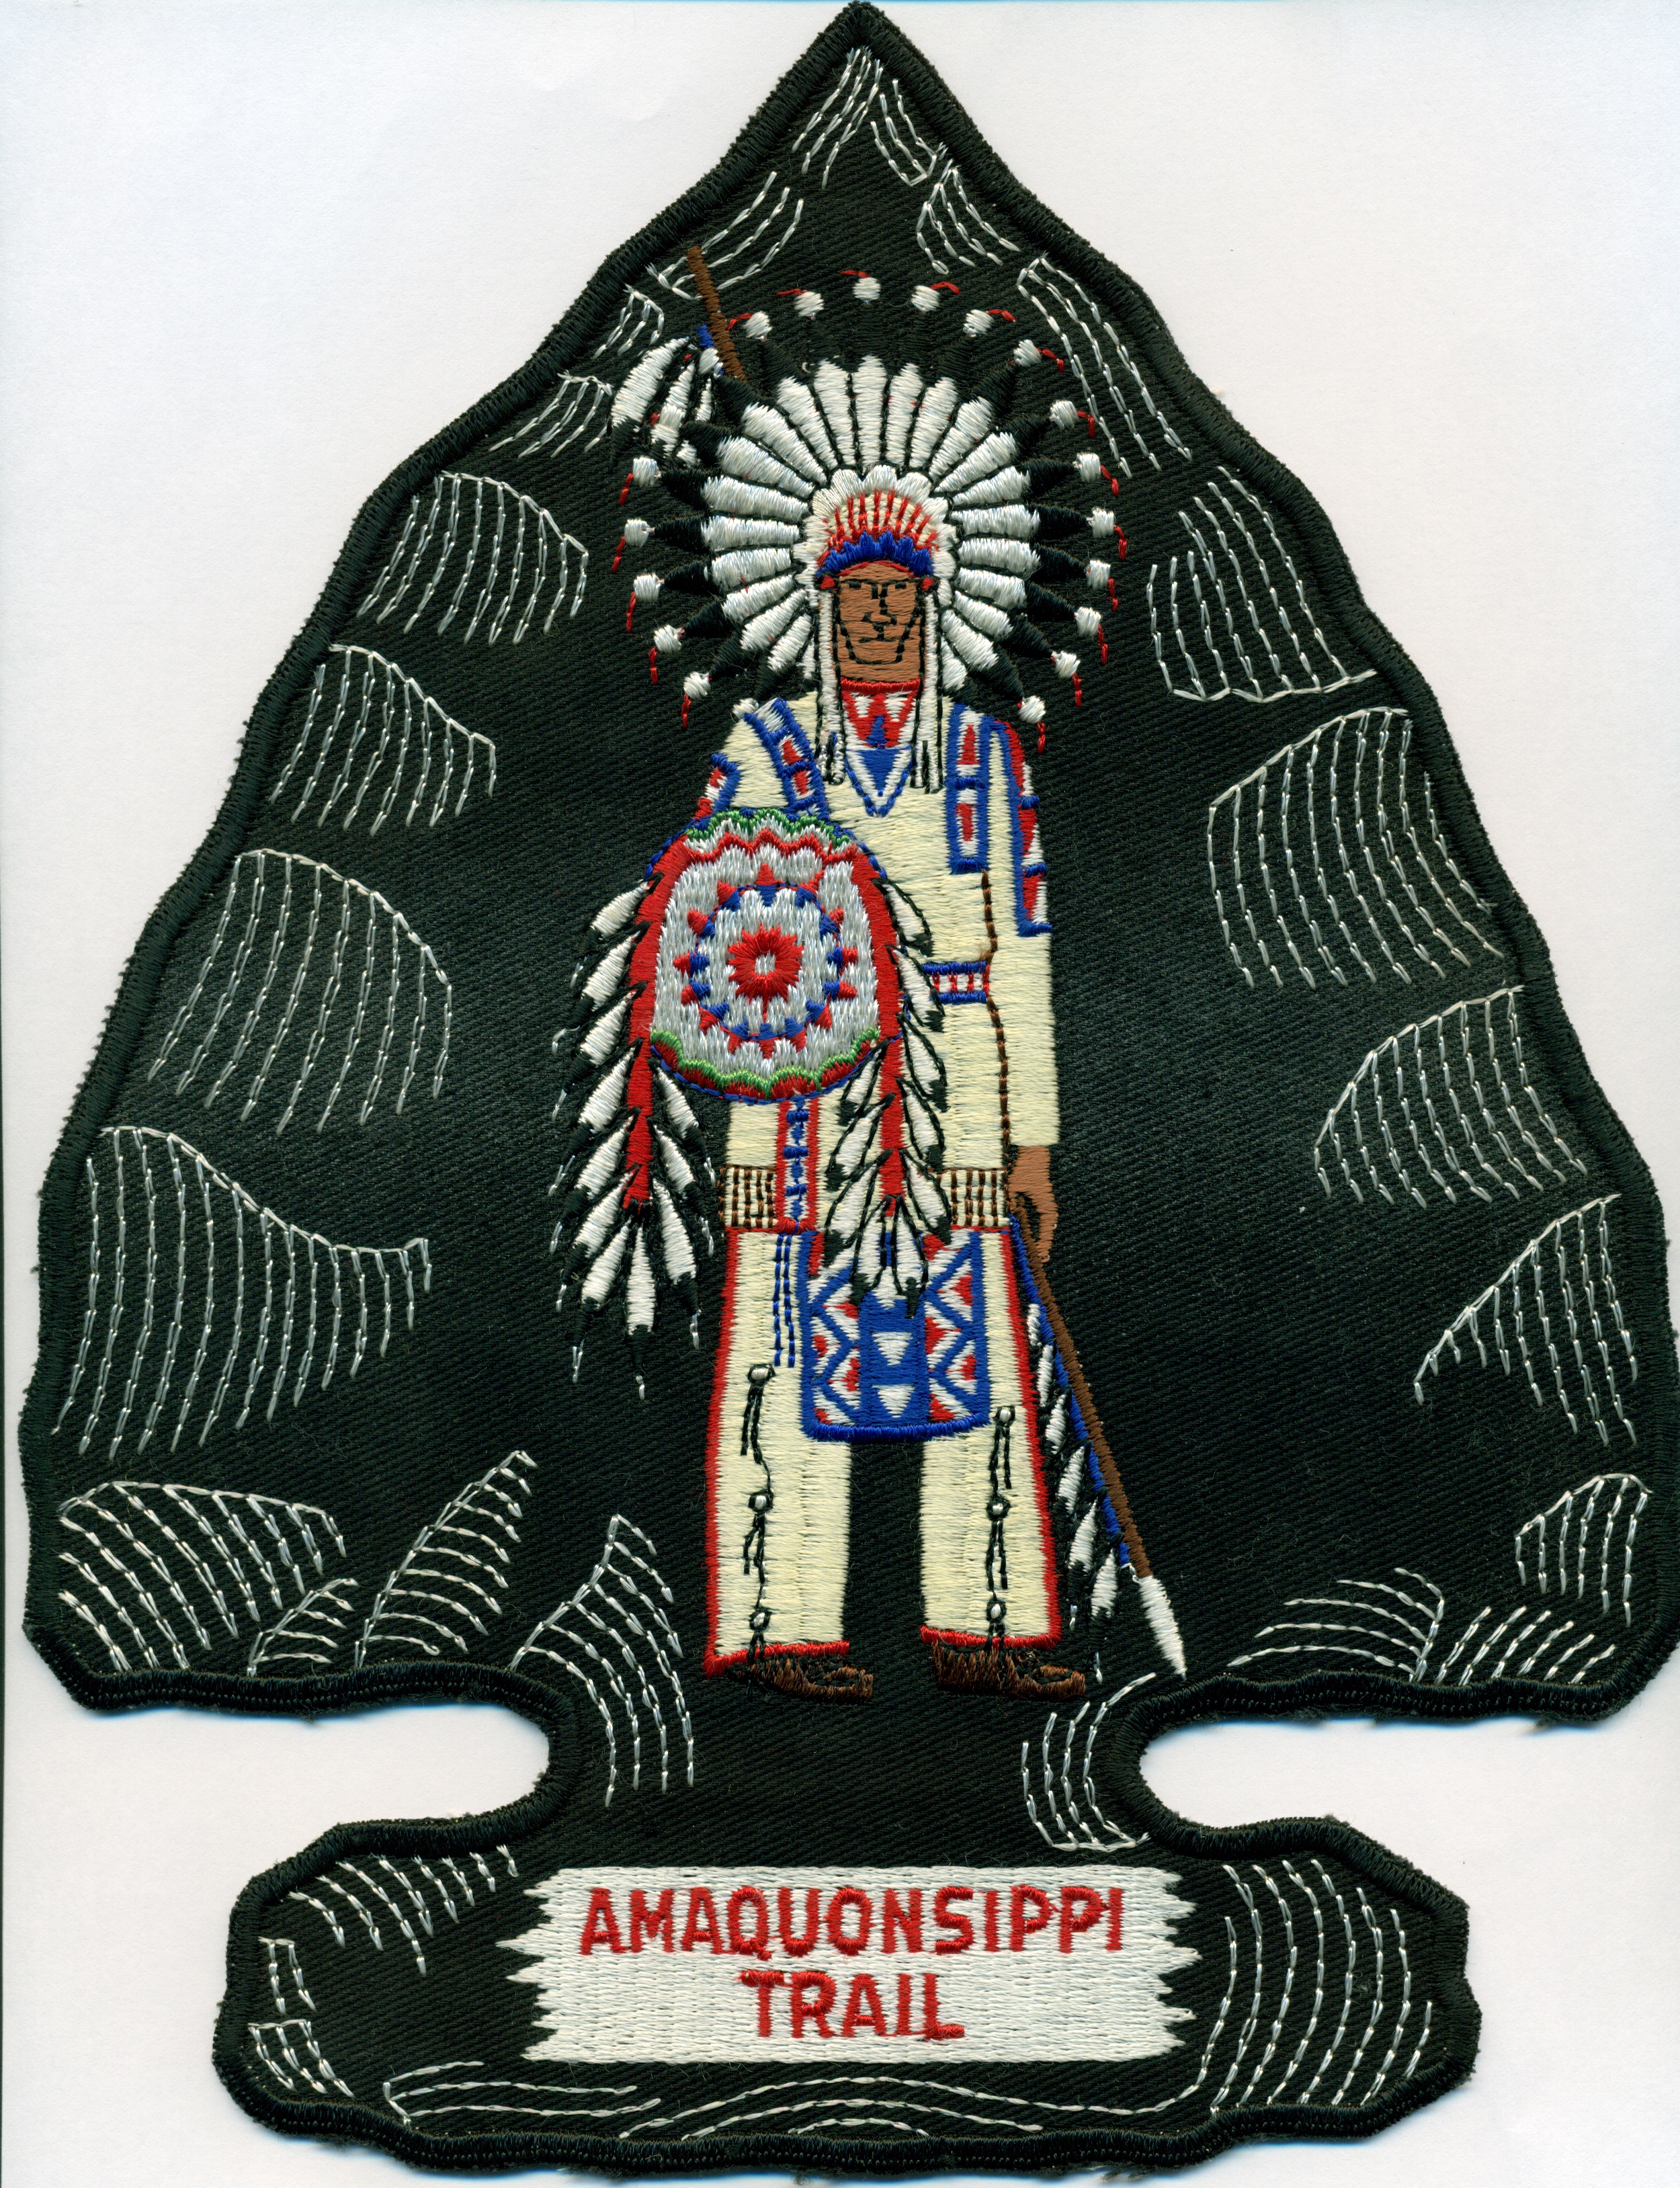 Amaquonsippi Trail Jacket Patch image